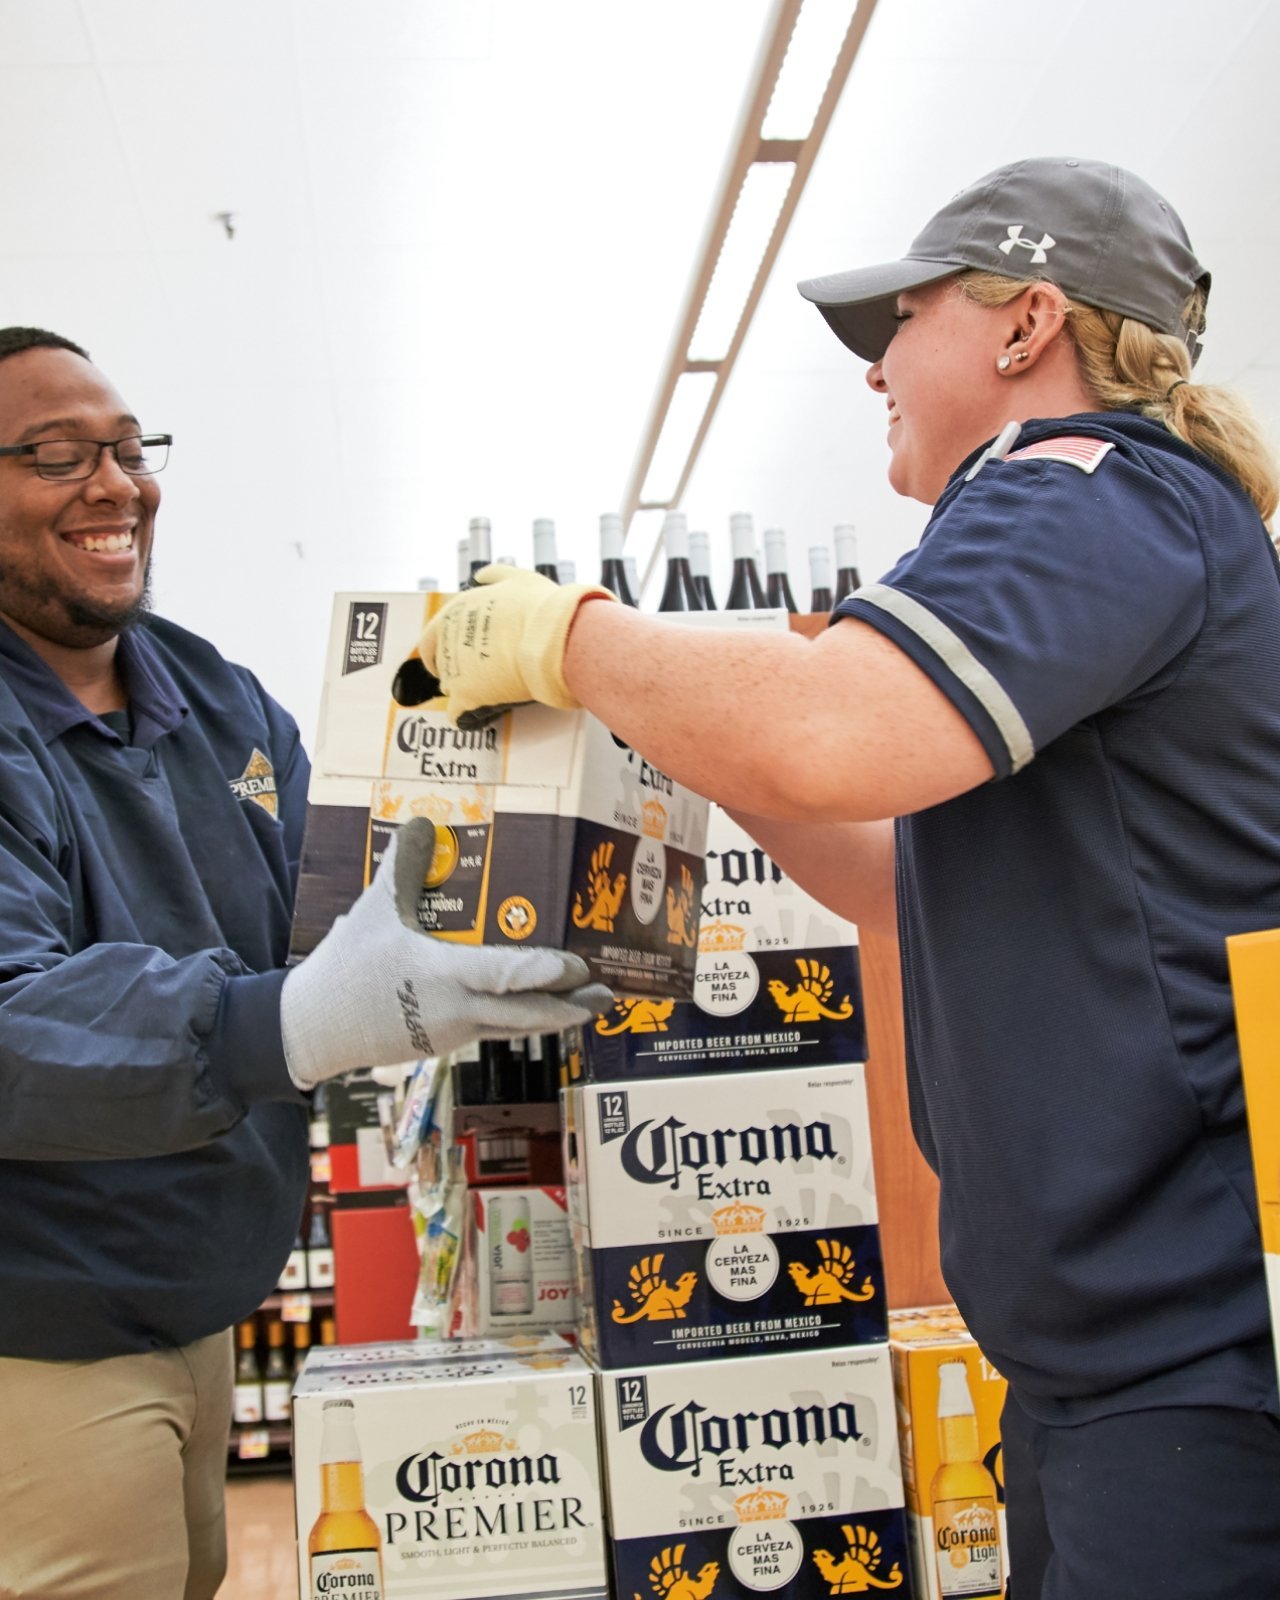 A man and a woman working together in a store aisle putting away a 12-pack of Corona Extra